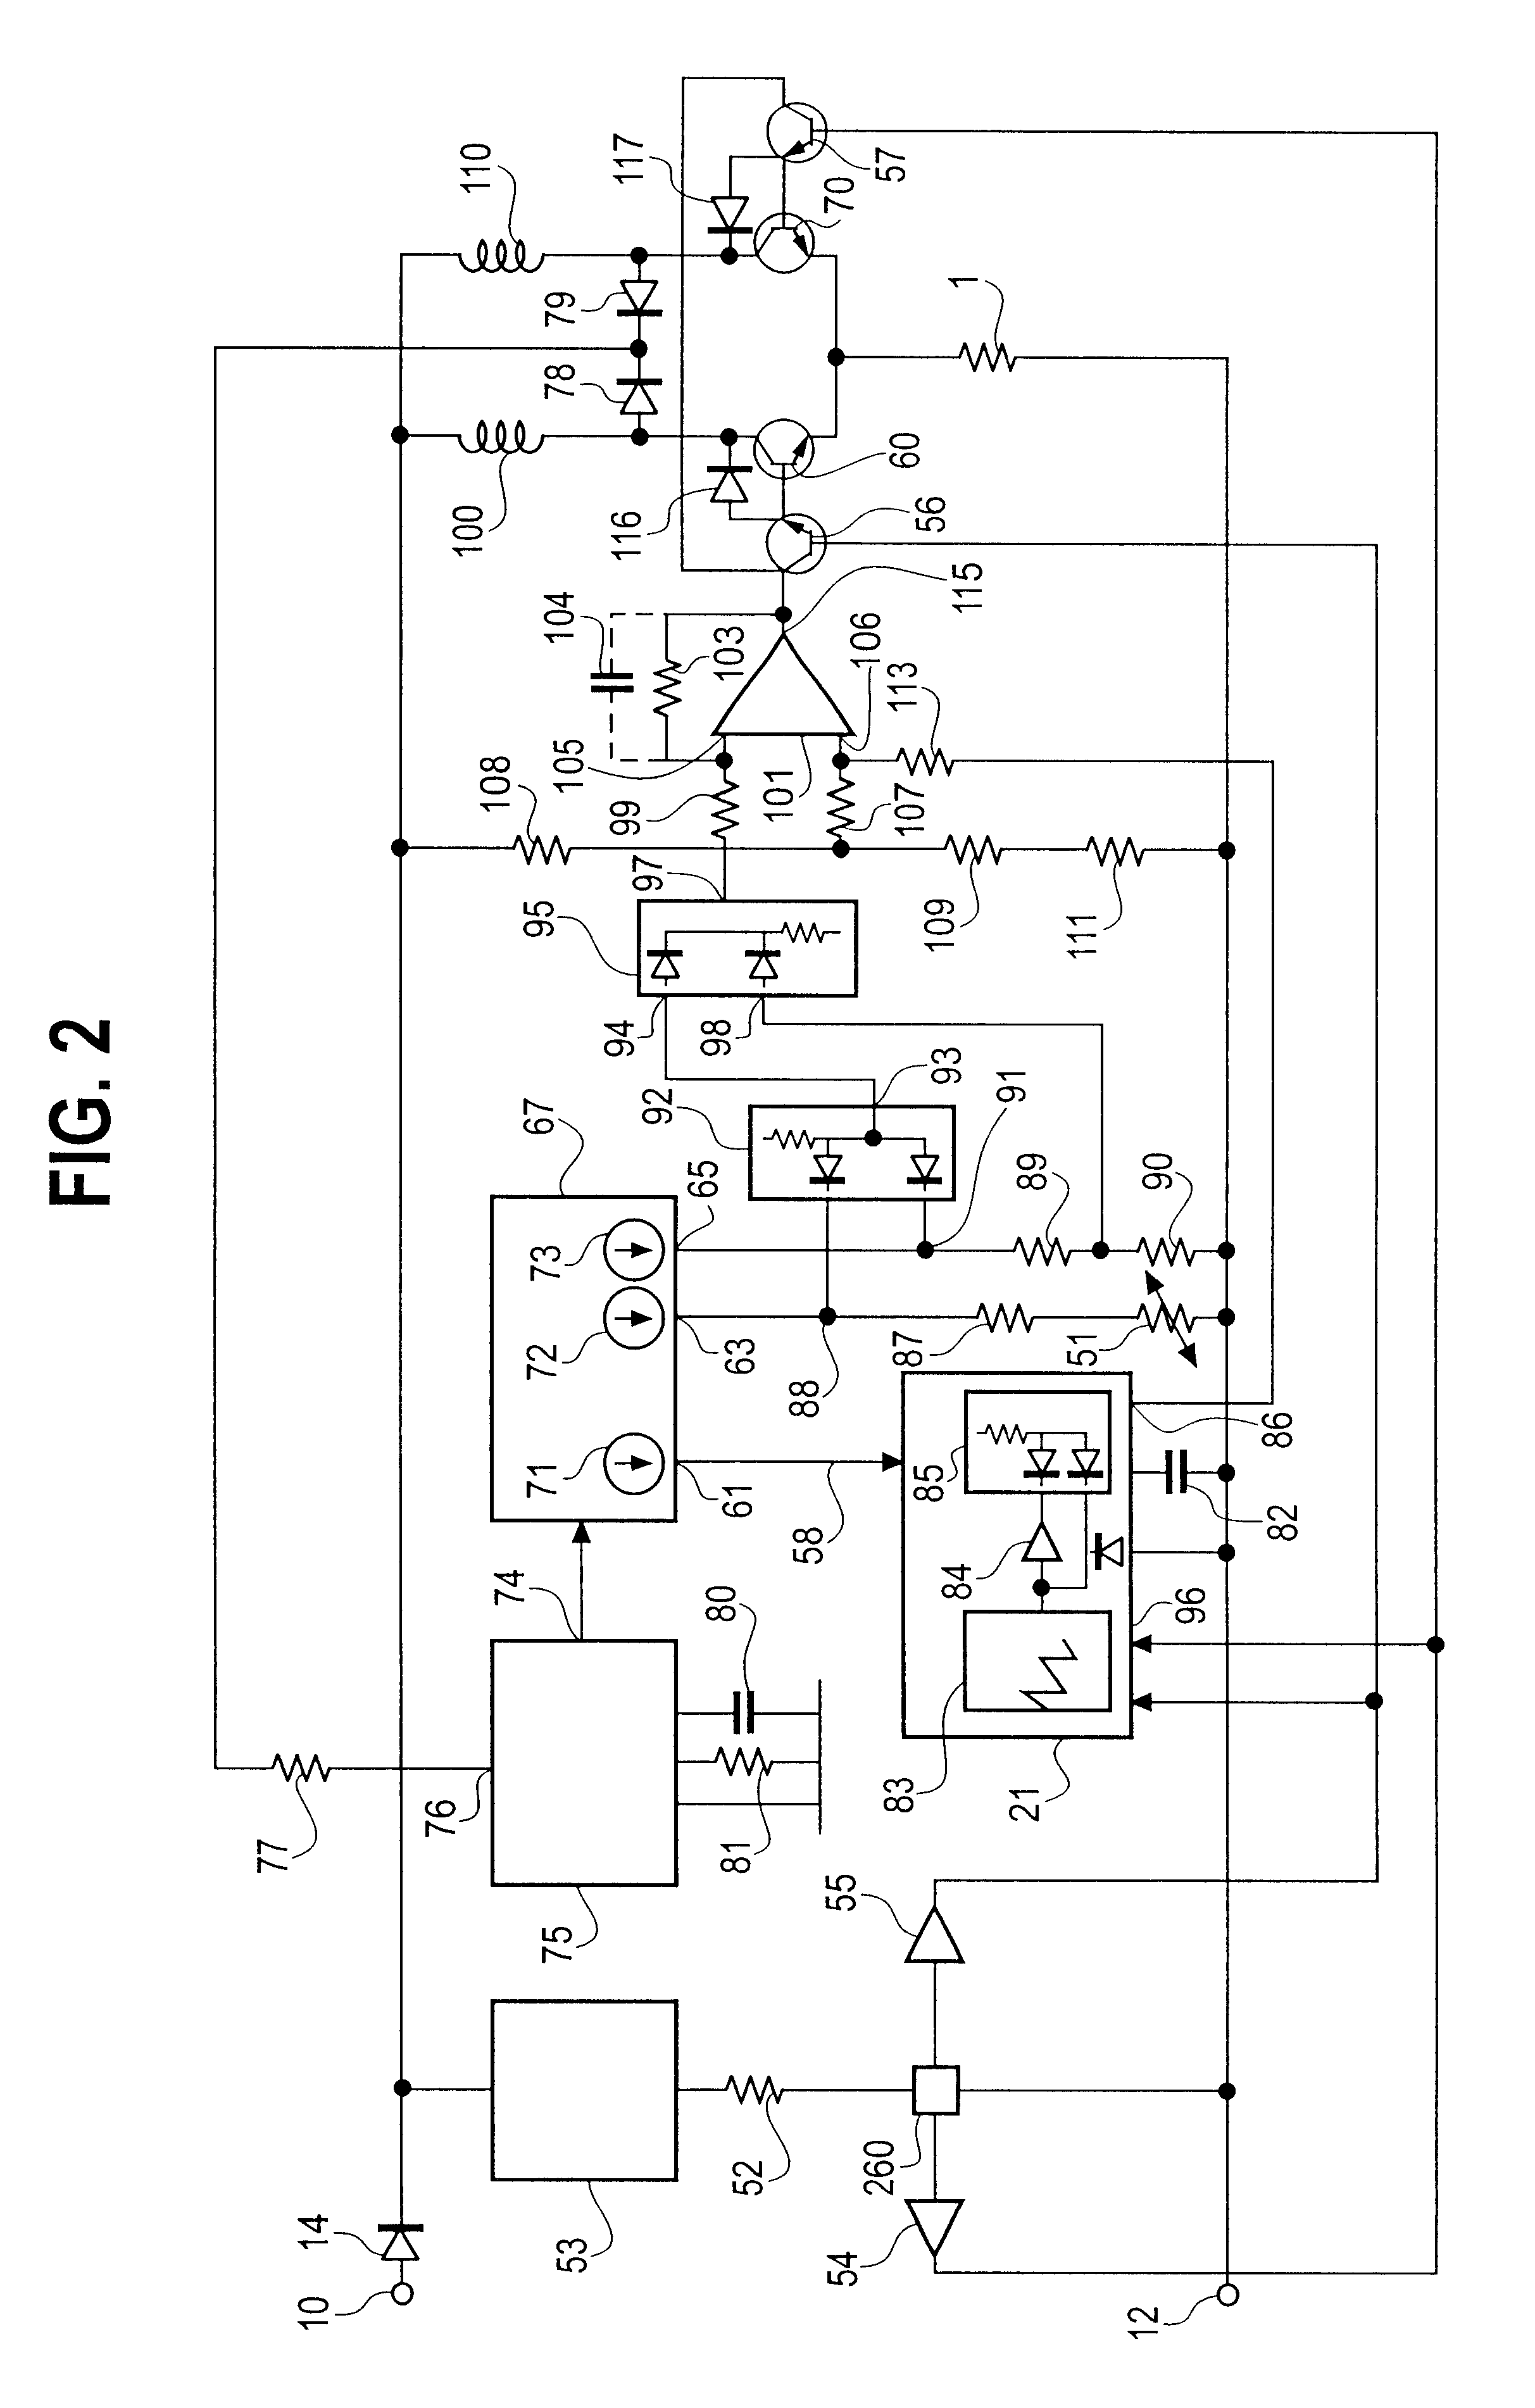 Collectorless direct current motor, driver circuit for a drive and method of operating a collectorless direct current motor